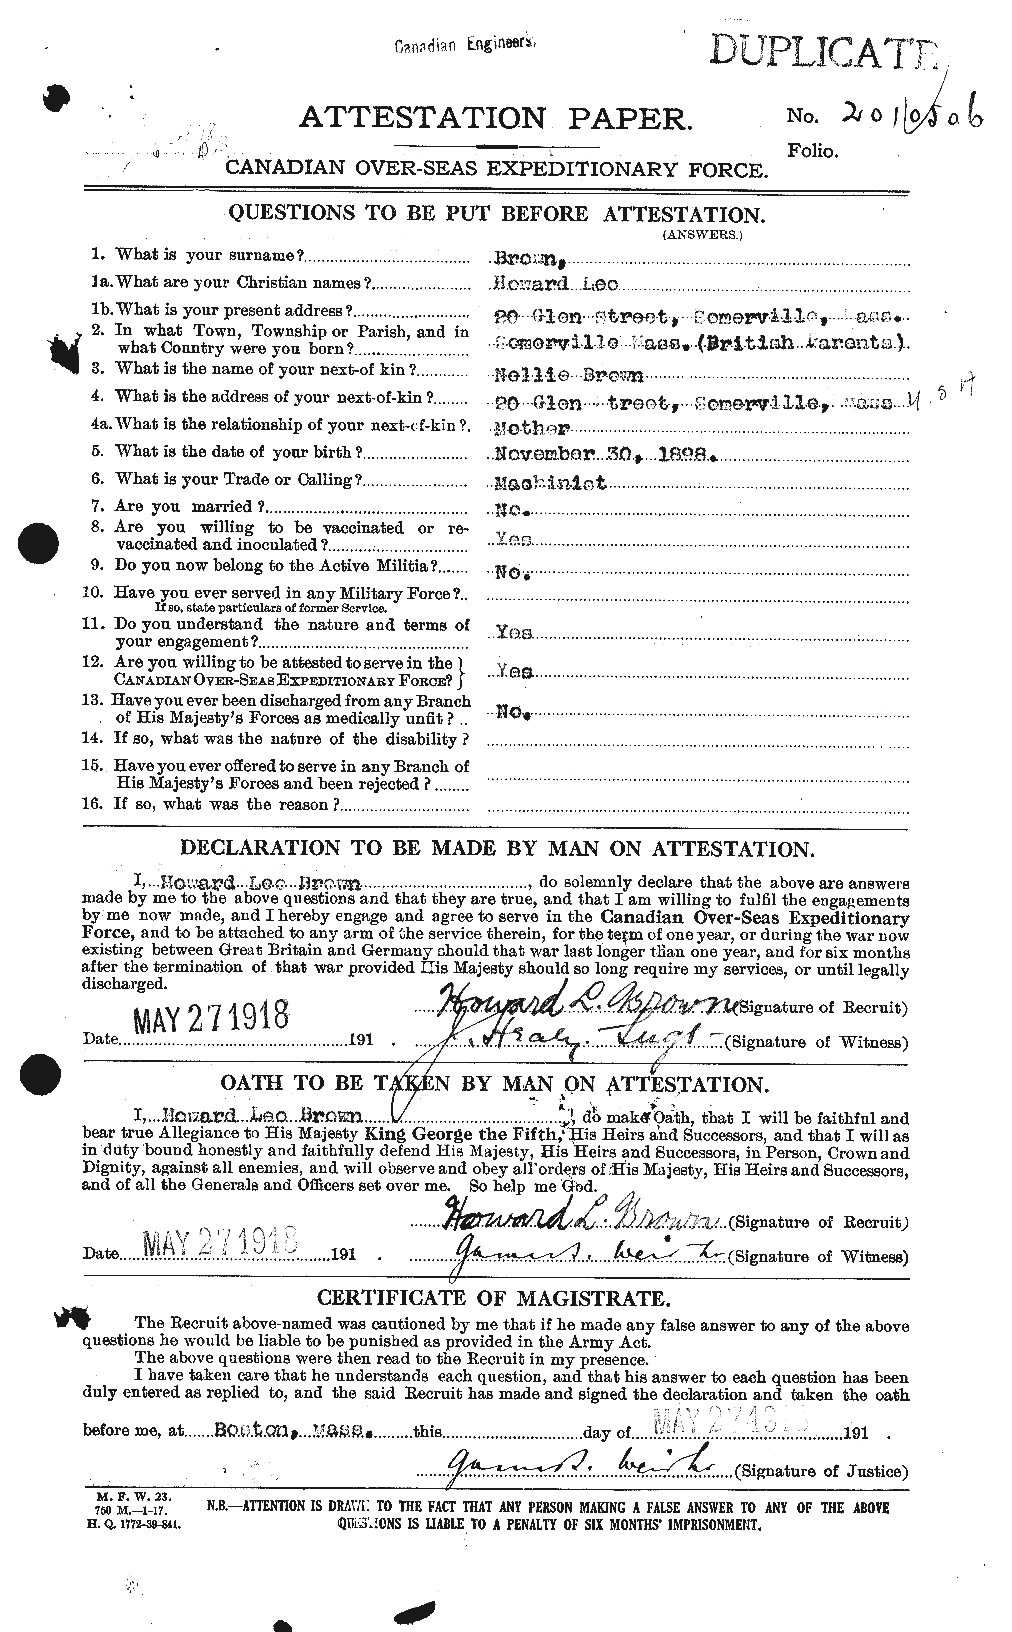 Personnel Records of the First World War - CEF 265619a